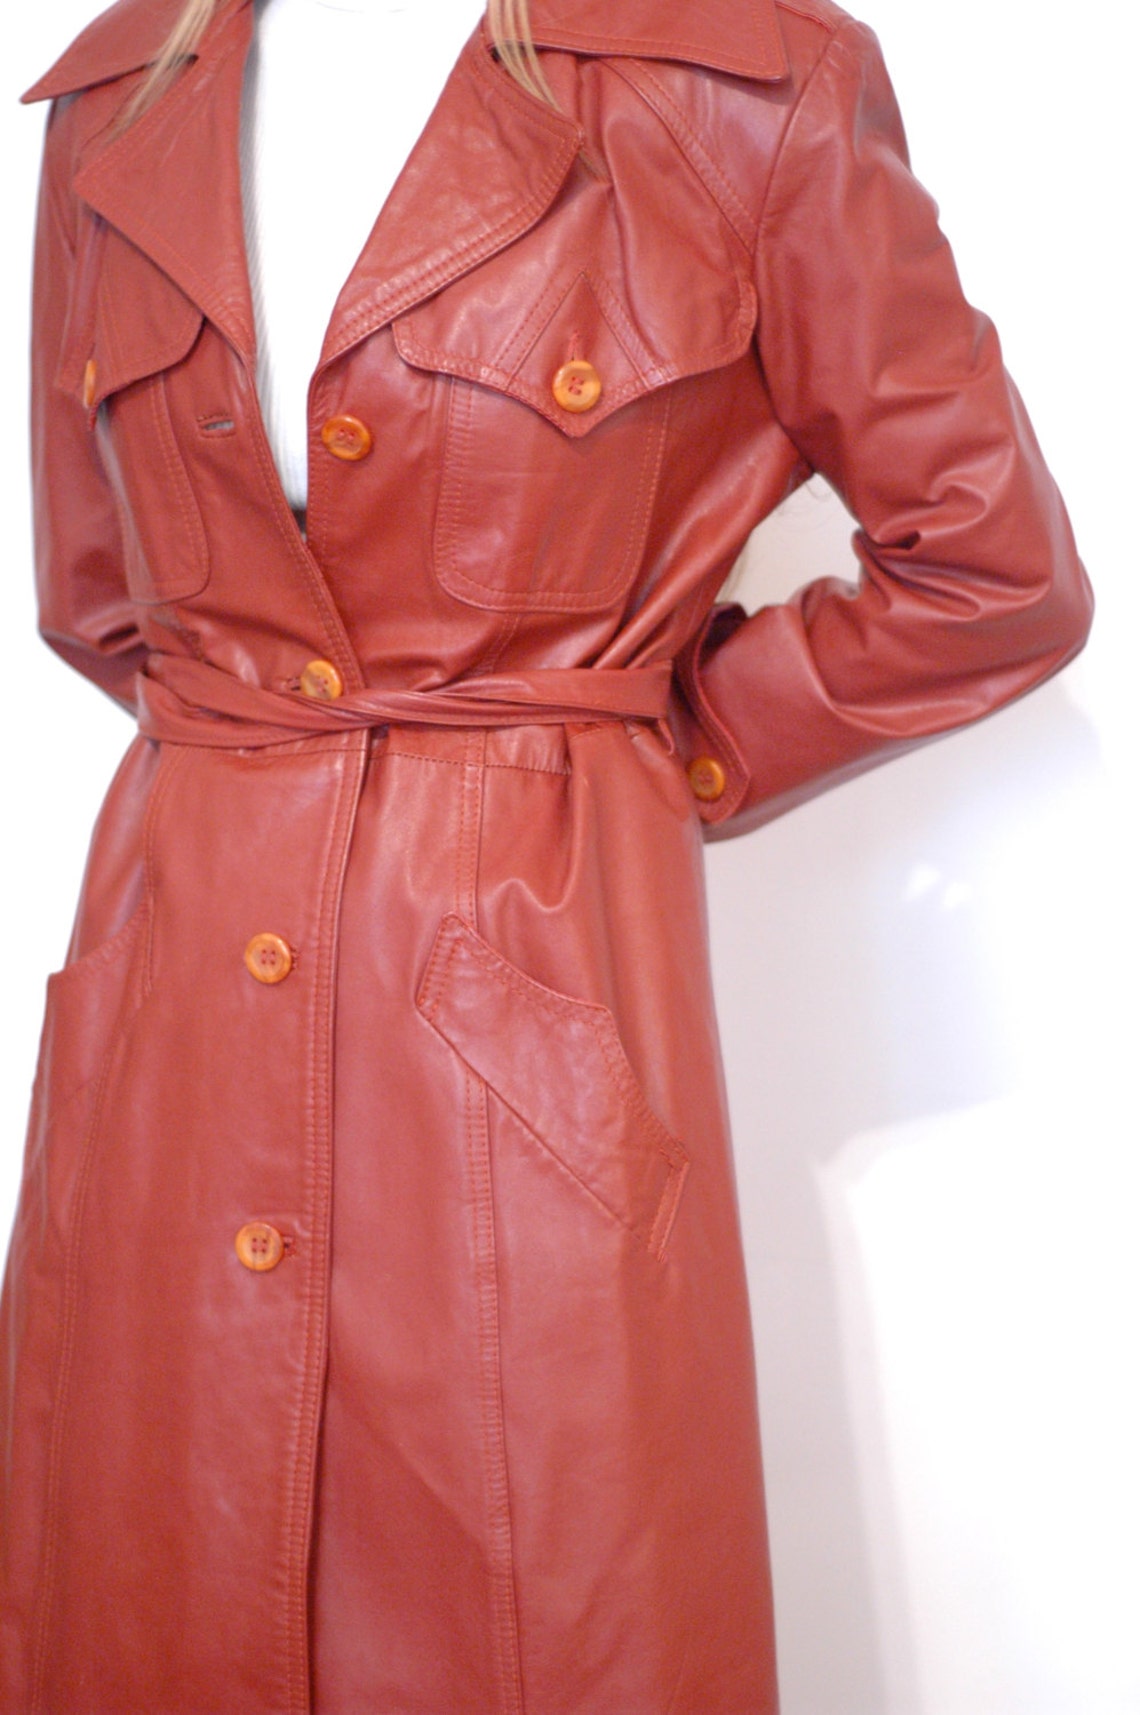 Rust colored leather belted trench coat M | Etsy